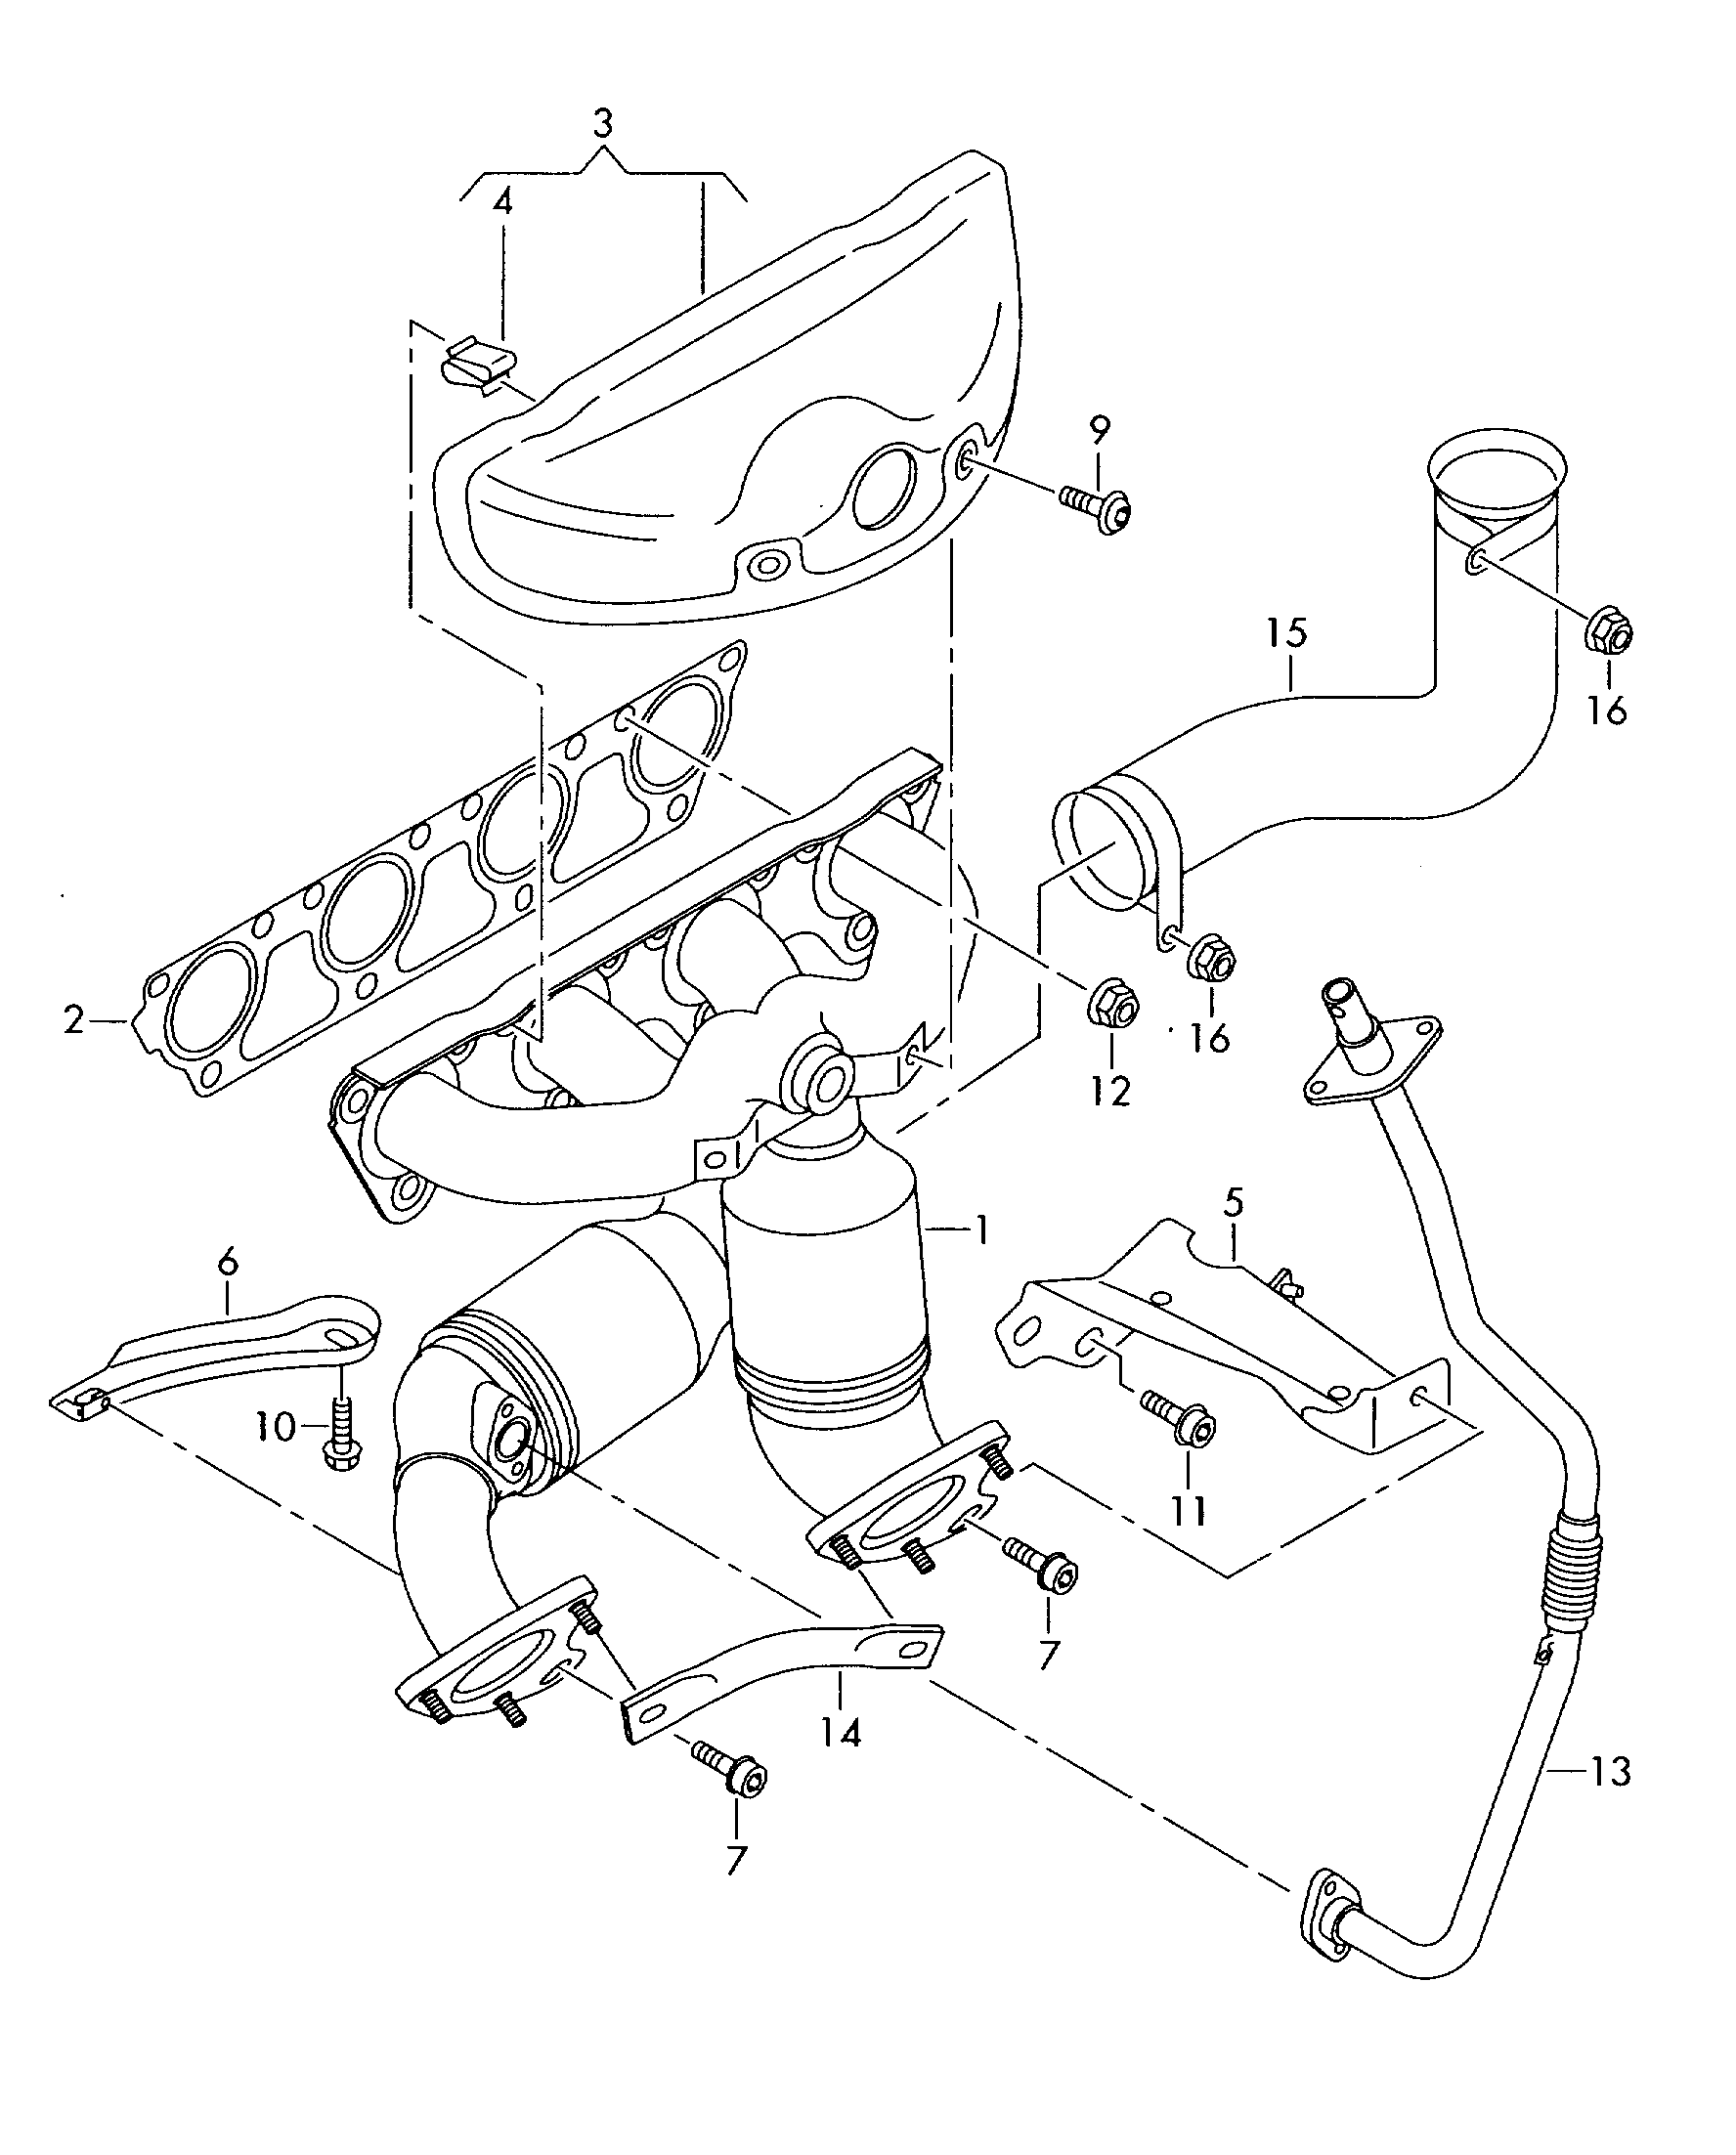 exhaust manifold with
catalytic converter - Leon/Leon 4(LE)  